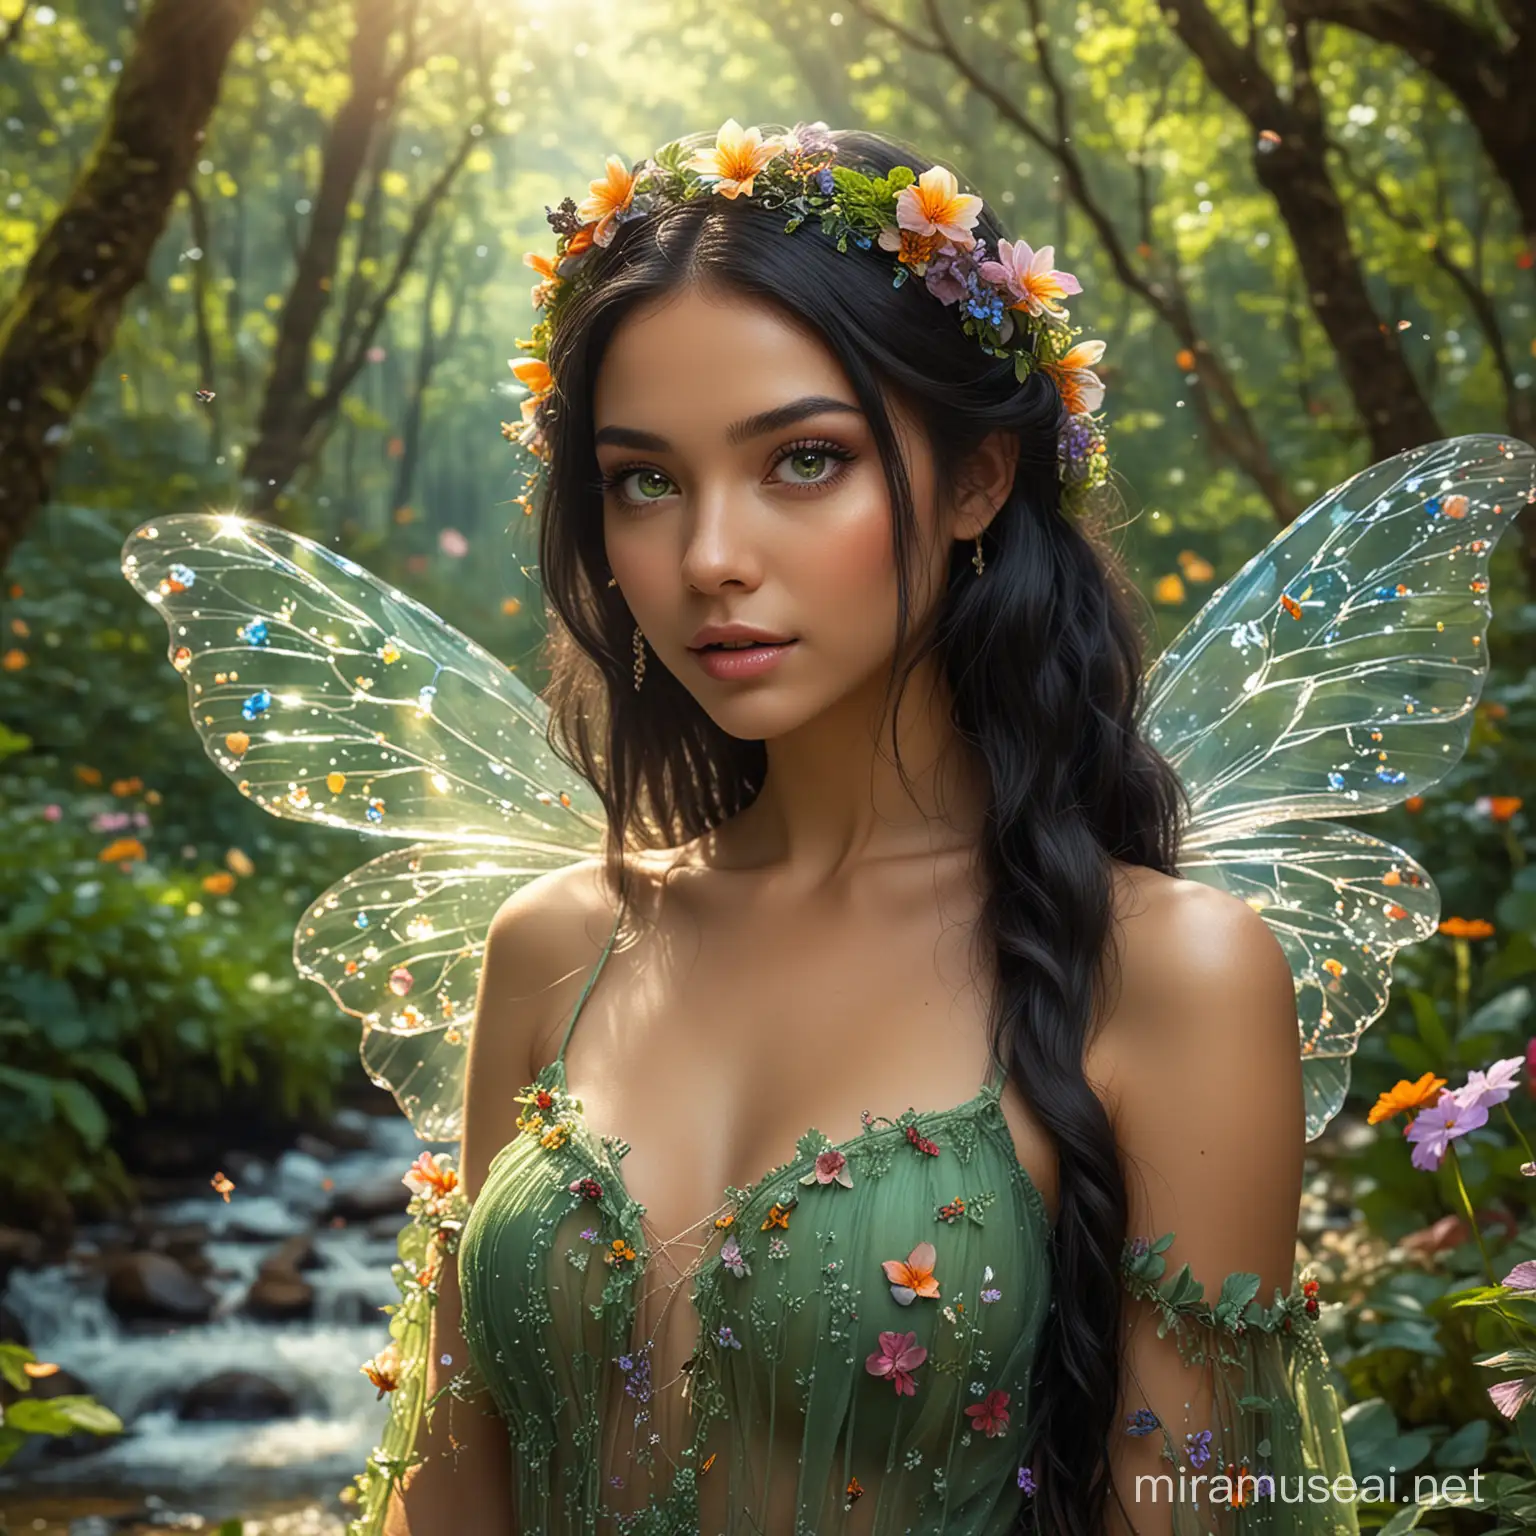 Beautiful and stunning fairy, black hair, delicate face, green eyes, adorned, with delicate transparent wings, colorful flowers in hair, full body, clear backlight, colorful forest, mushrooms, stream and butterflies, captured in this 8K HDR raw photo .